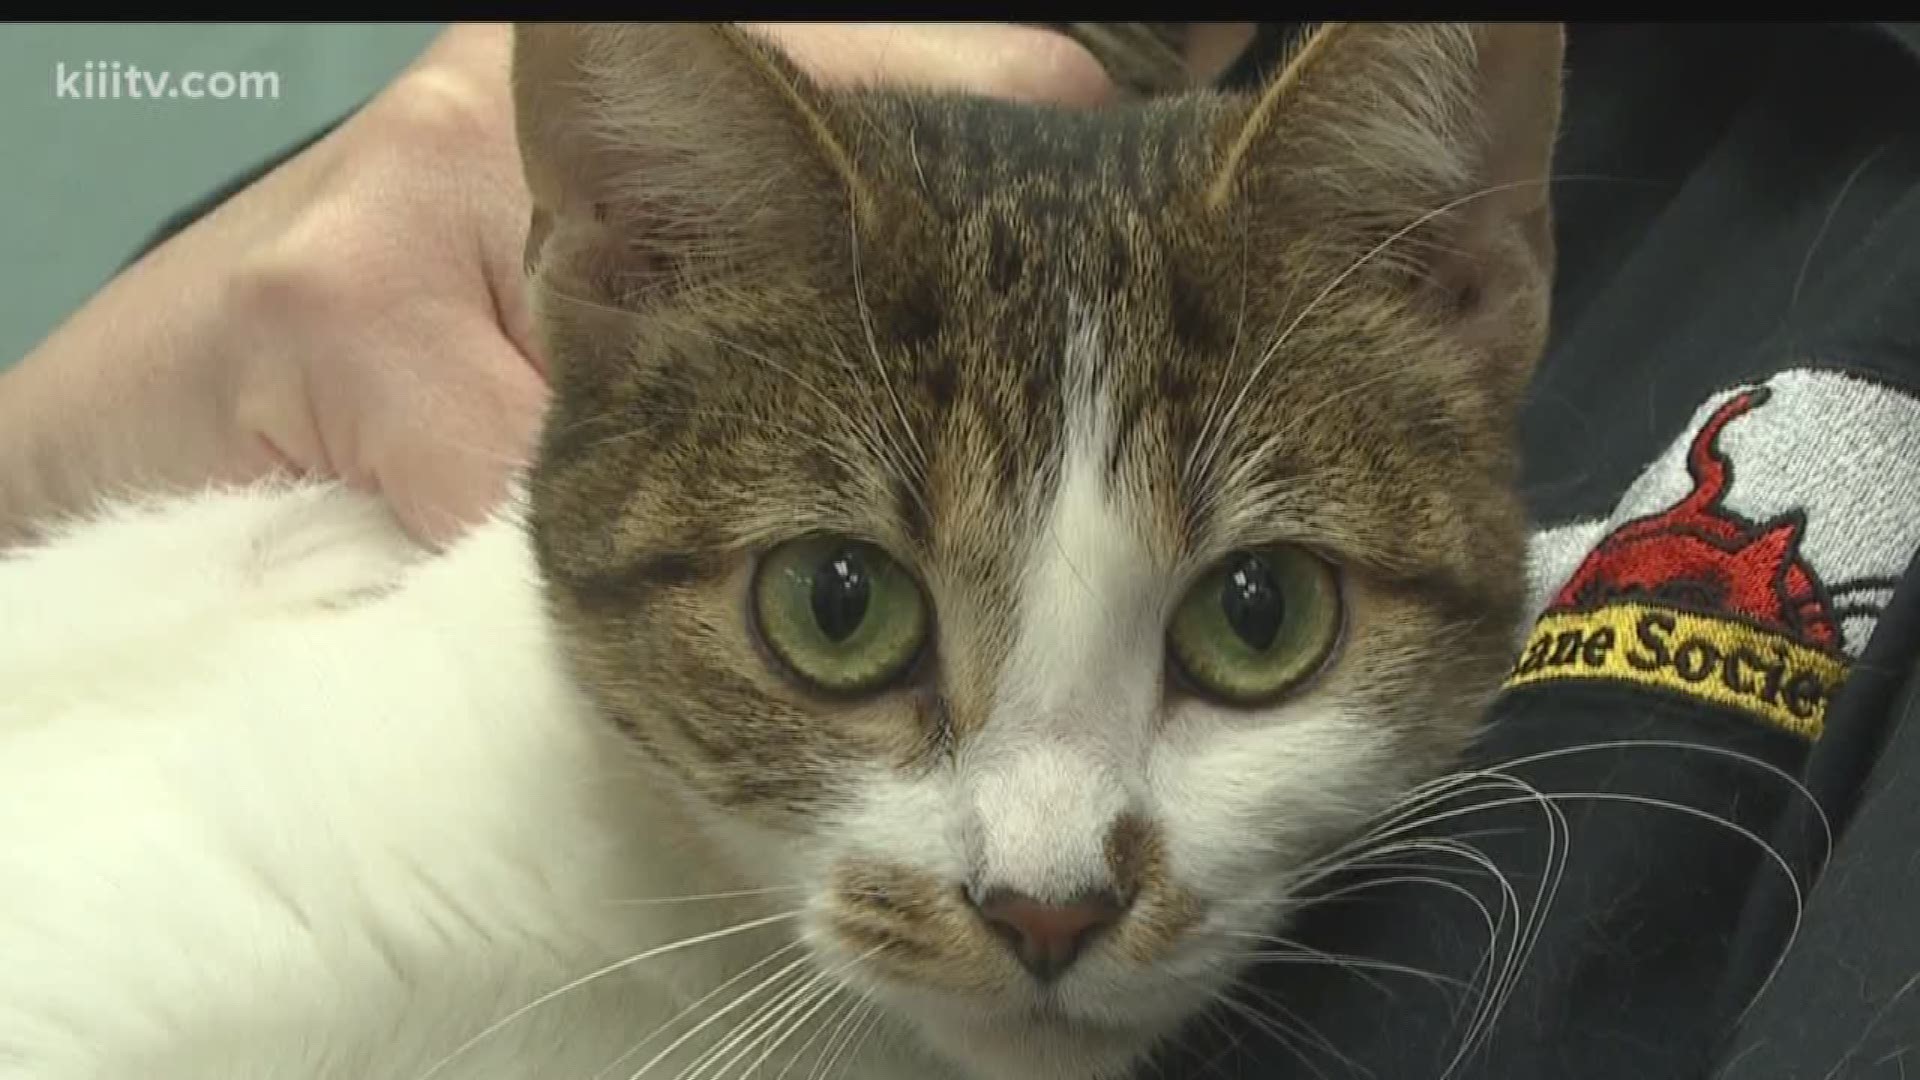 See if you can help find 2 year old Hazel find a loving home in this edition of Paws for Pets.